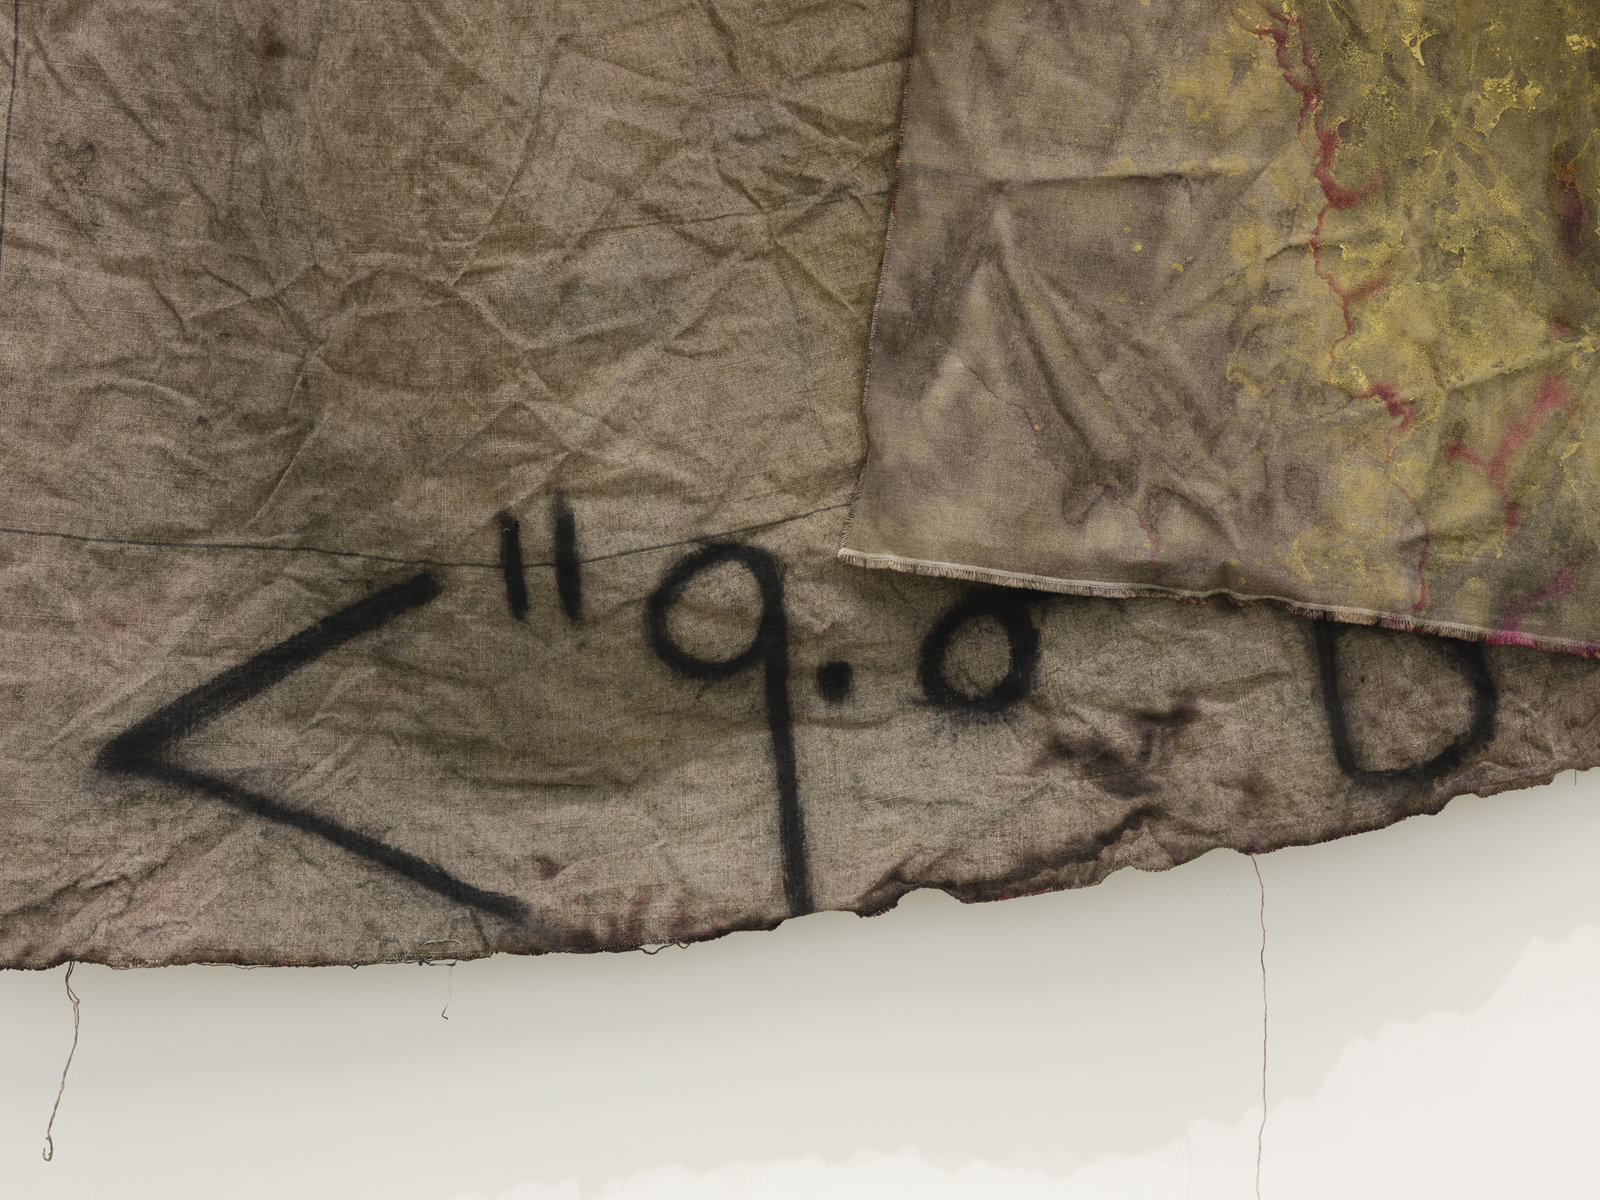 Duane Linklater, aspirated fragment (detail), 2021, digital print on linen, cochineal dye, yellow ochre, honey, charcoal, nails, 62 x 49 x 12 in. (158 x 125 x 31 cm)